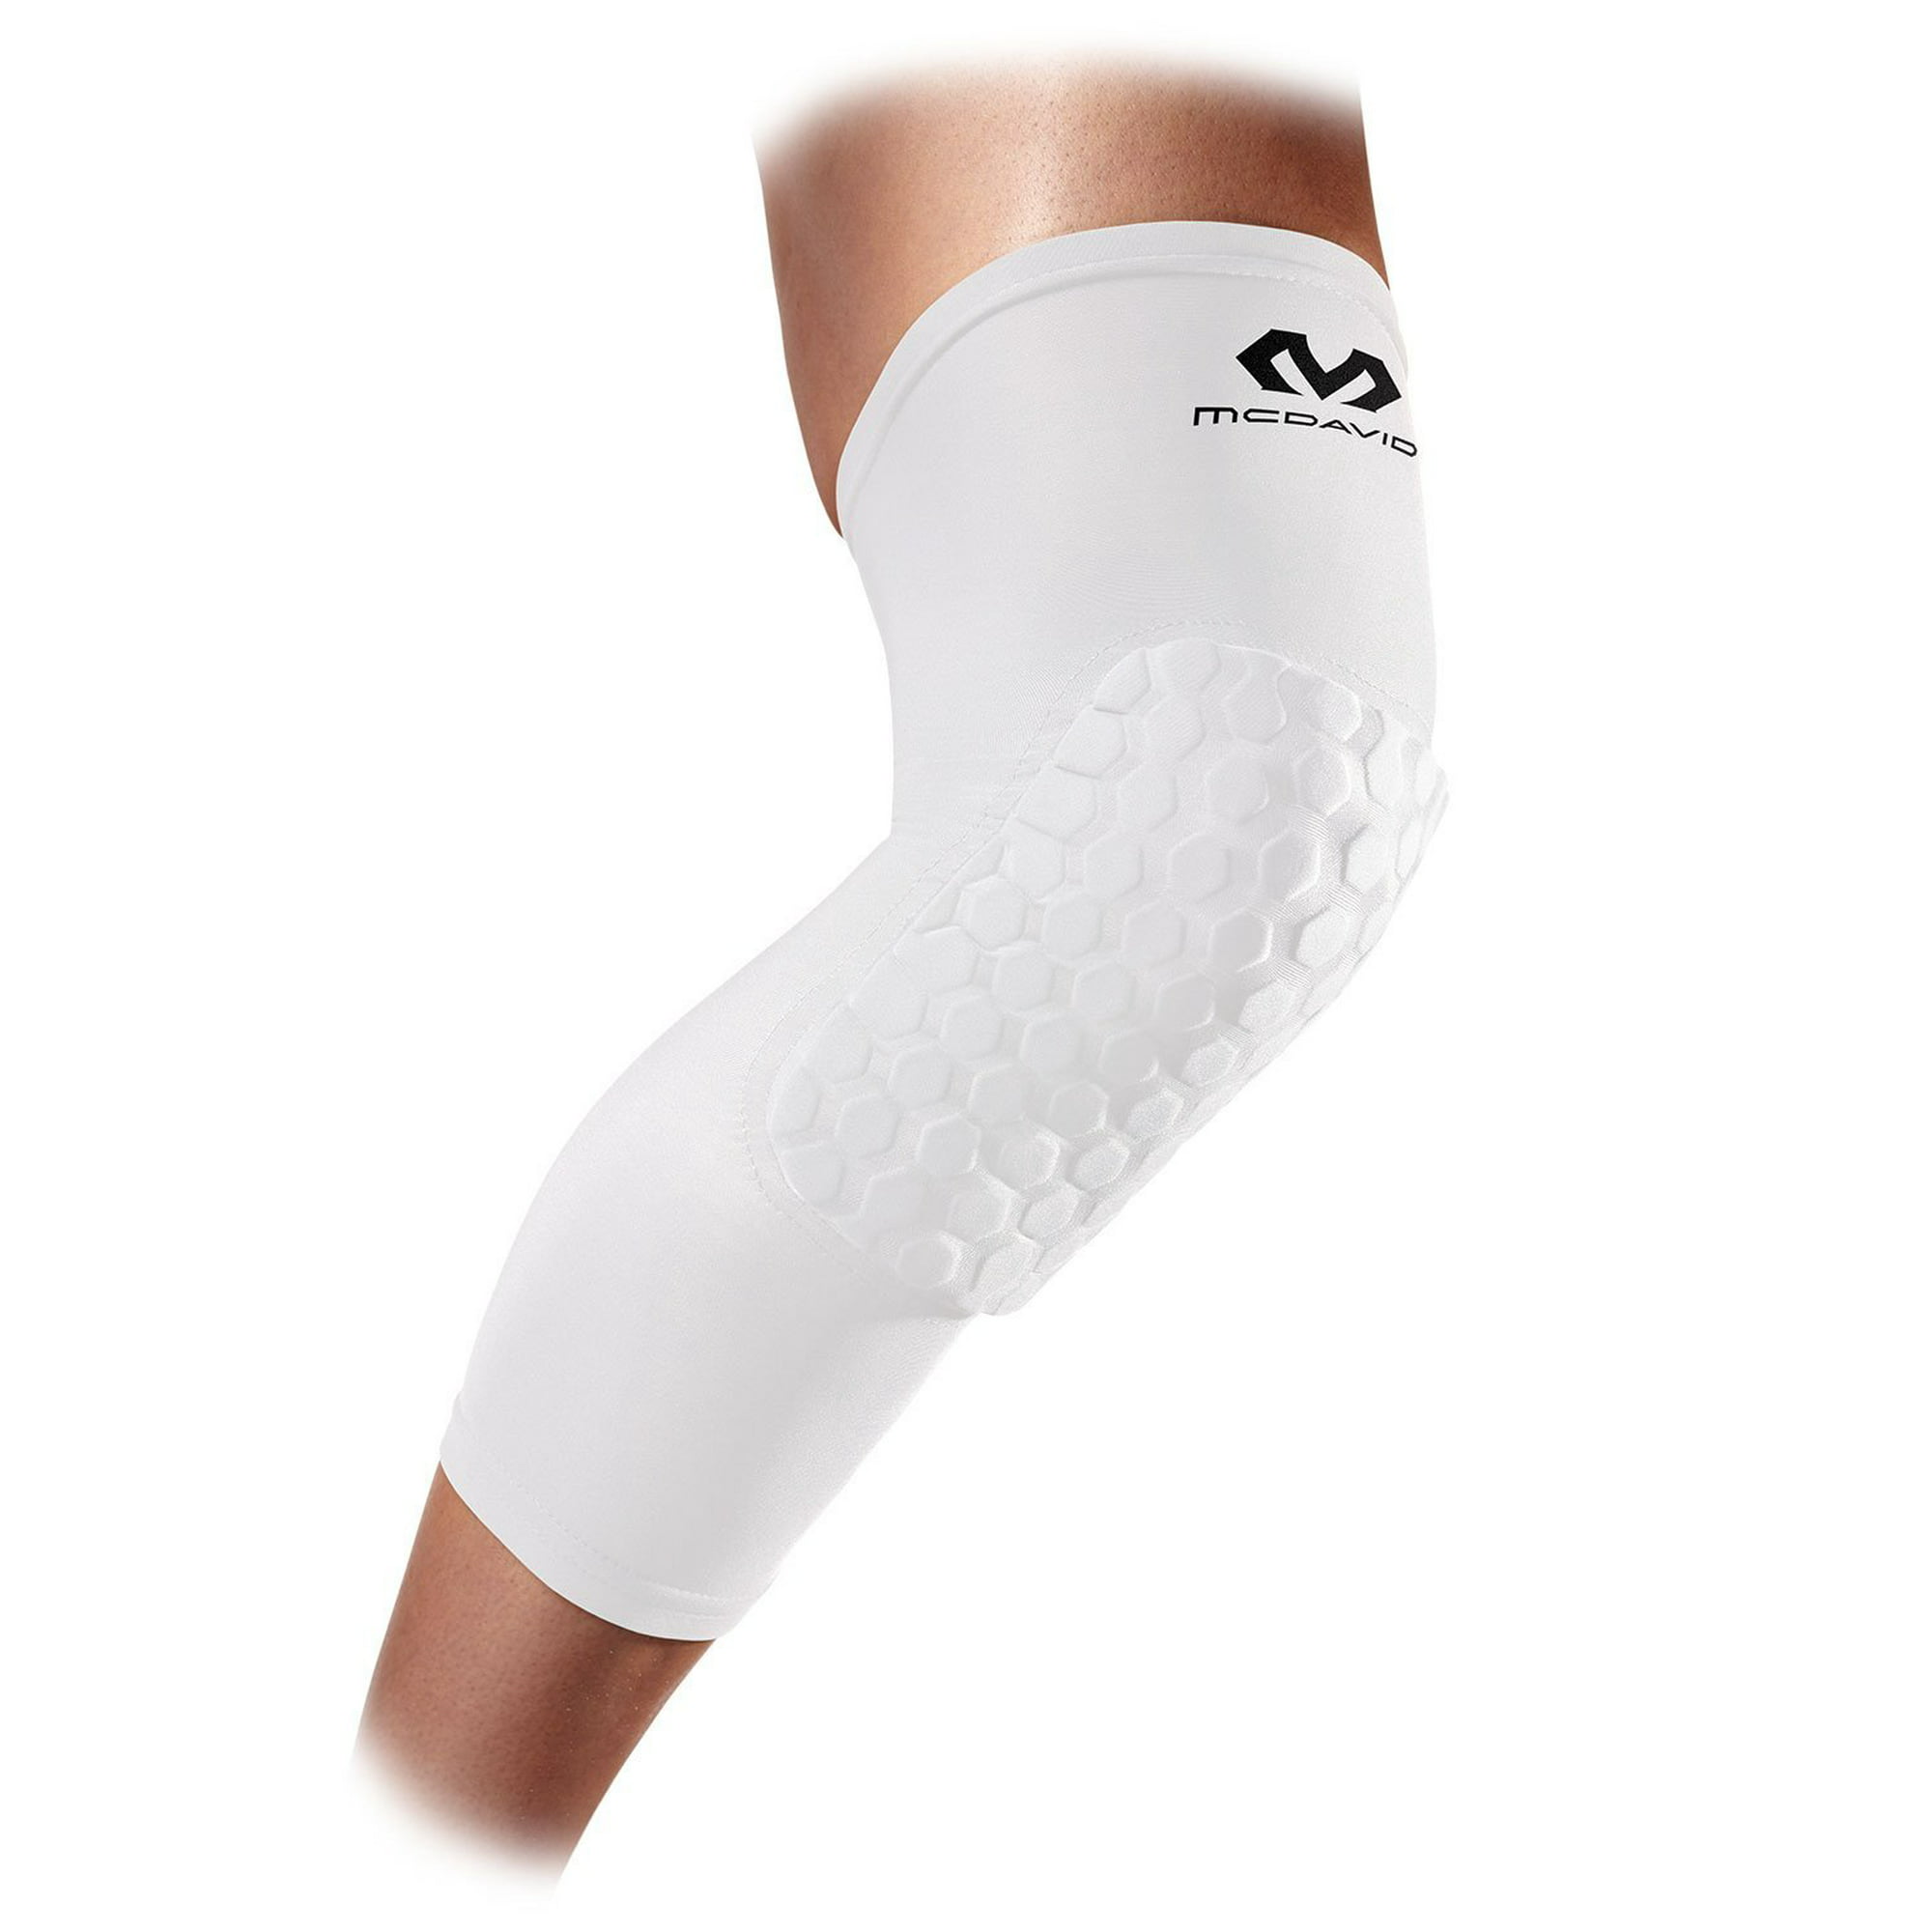 Tentacle discretion stimulate McDavid 6446 Hex Leg Sleeves Extended Compression Support Knee Pads PAIR ( Youth, White) - Walmart.com